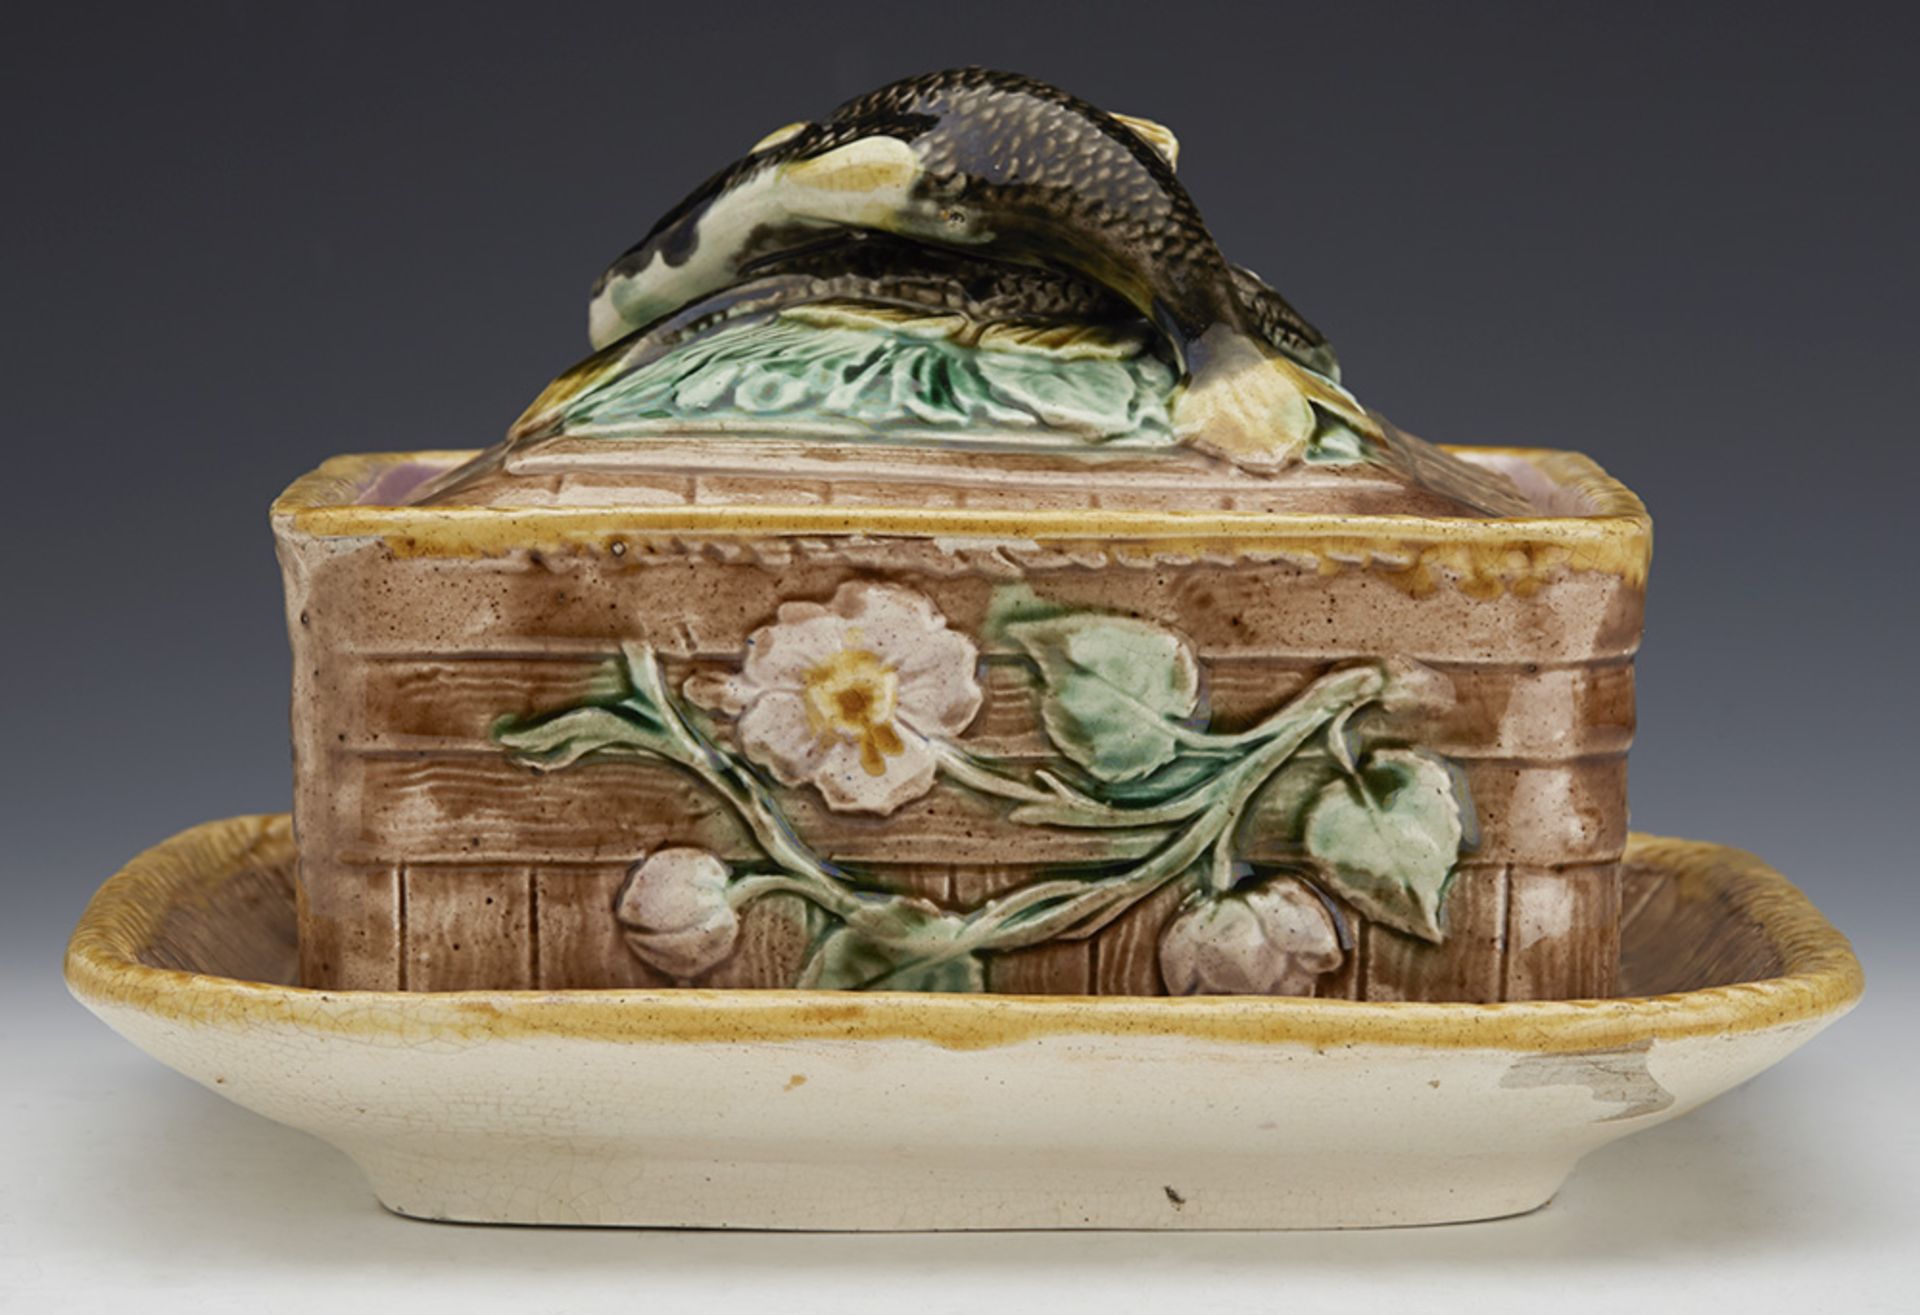 ANTIQUE ENGLISH MAJOLICA SARDINE DISH WITH FISH AND FLOWERS C.1865 - Image 3 of 10